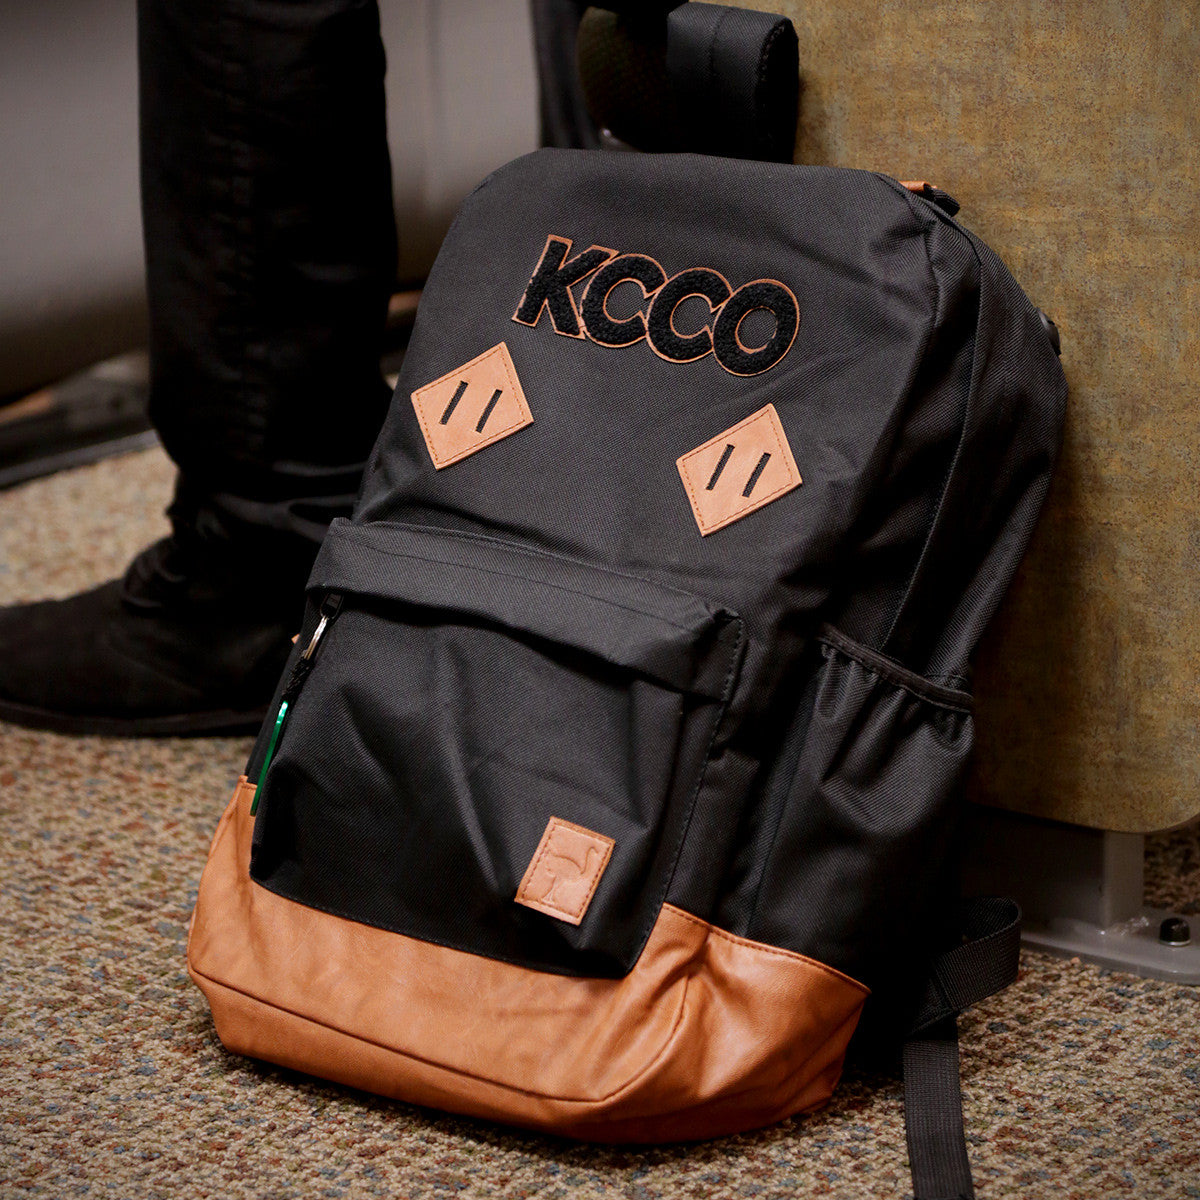 The Kcco Leather Backpack Is The Answer To The Big Tough Questions You Didn T Even Ask No Need